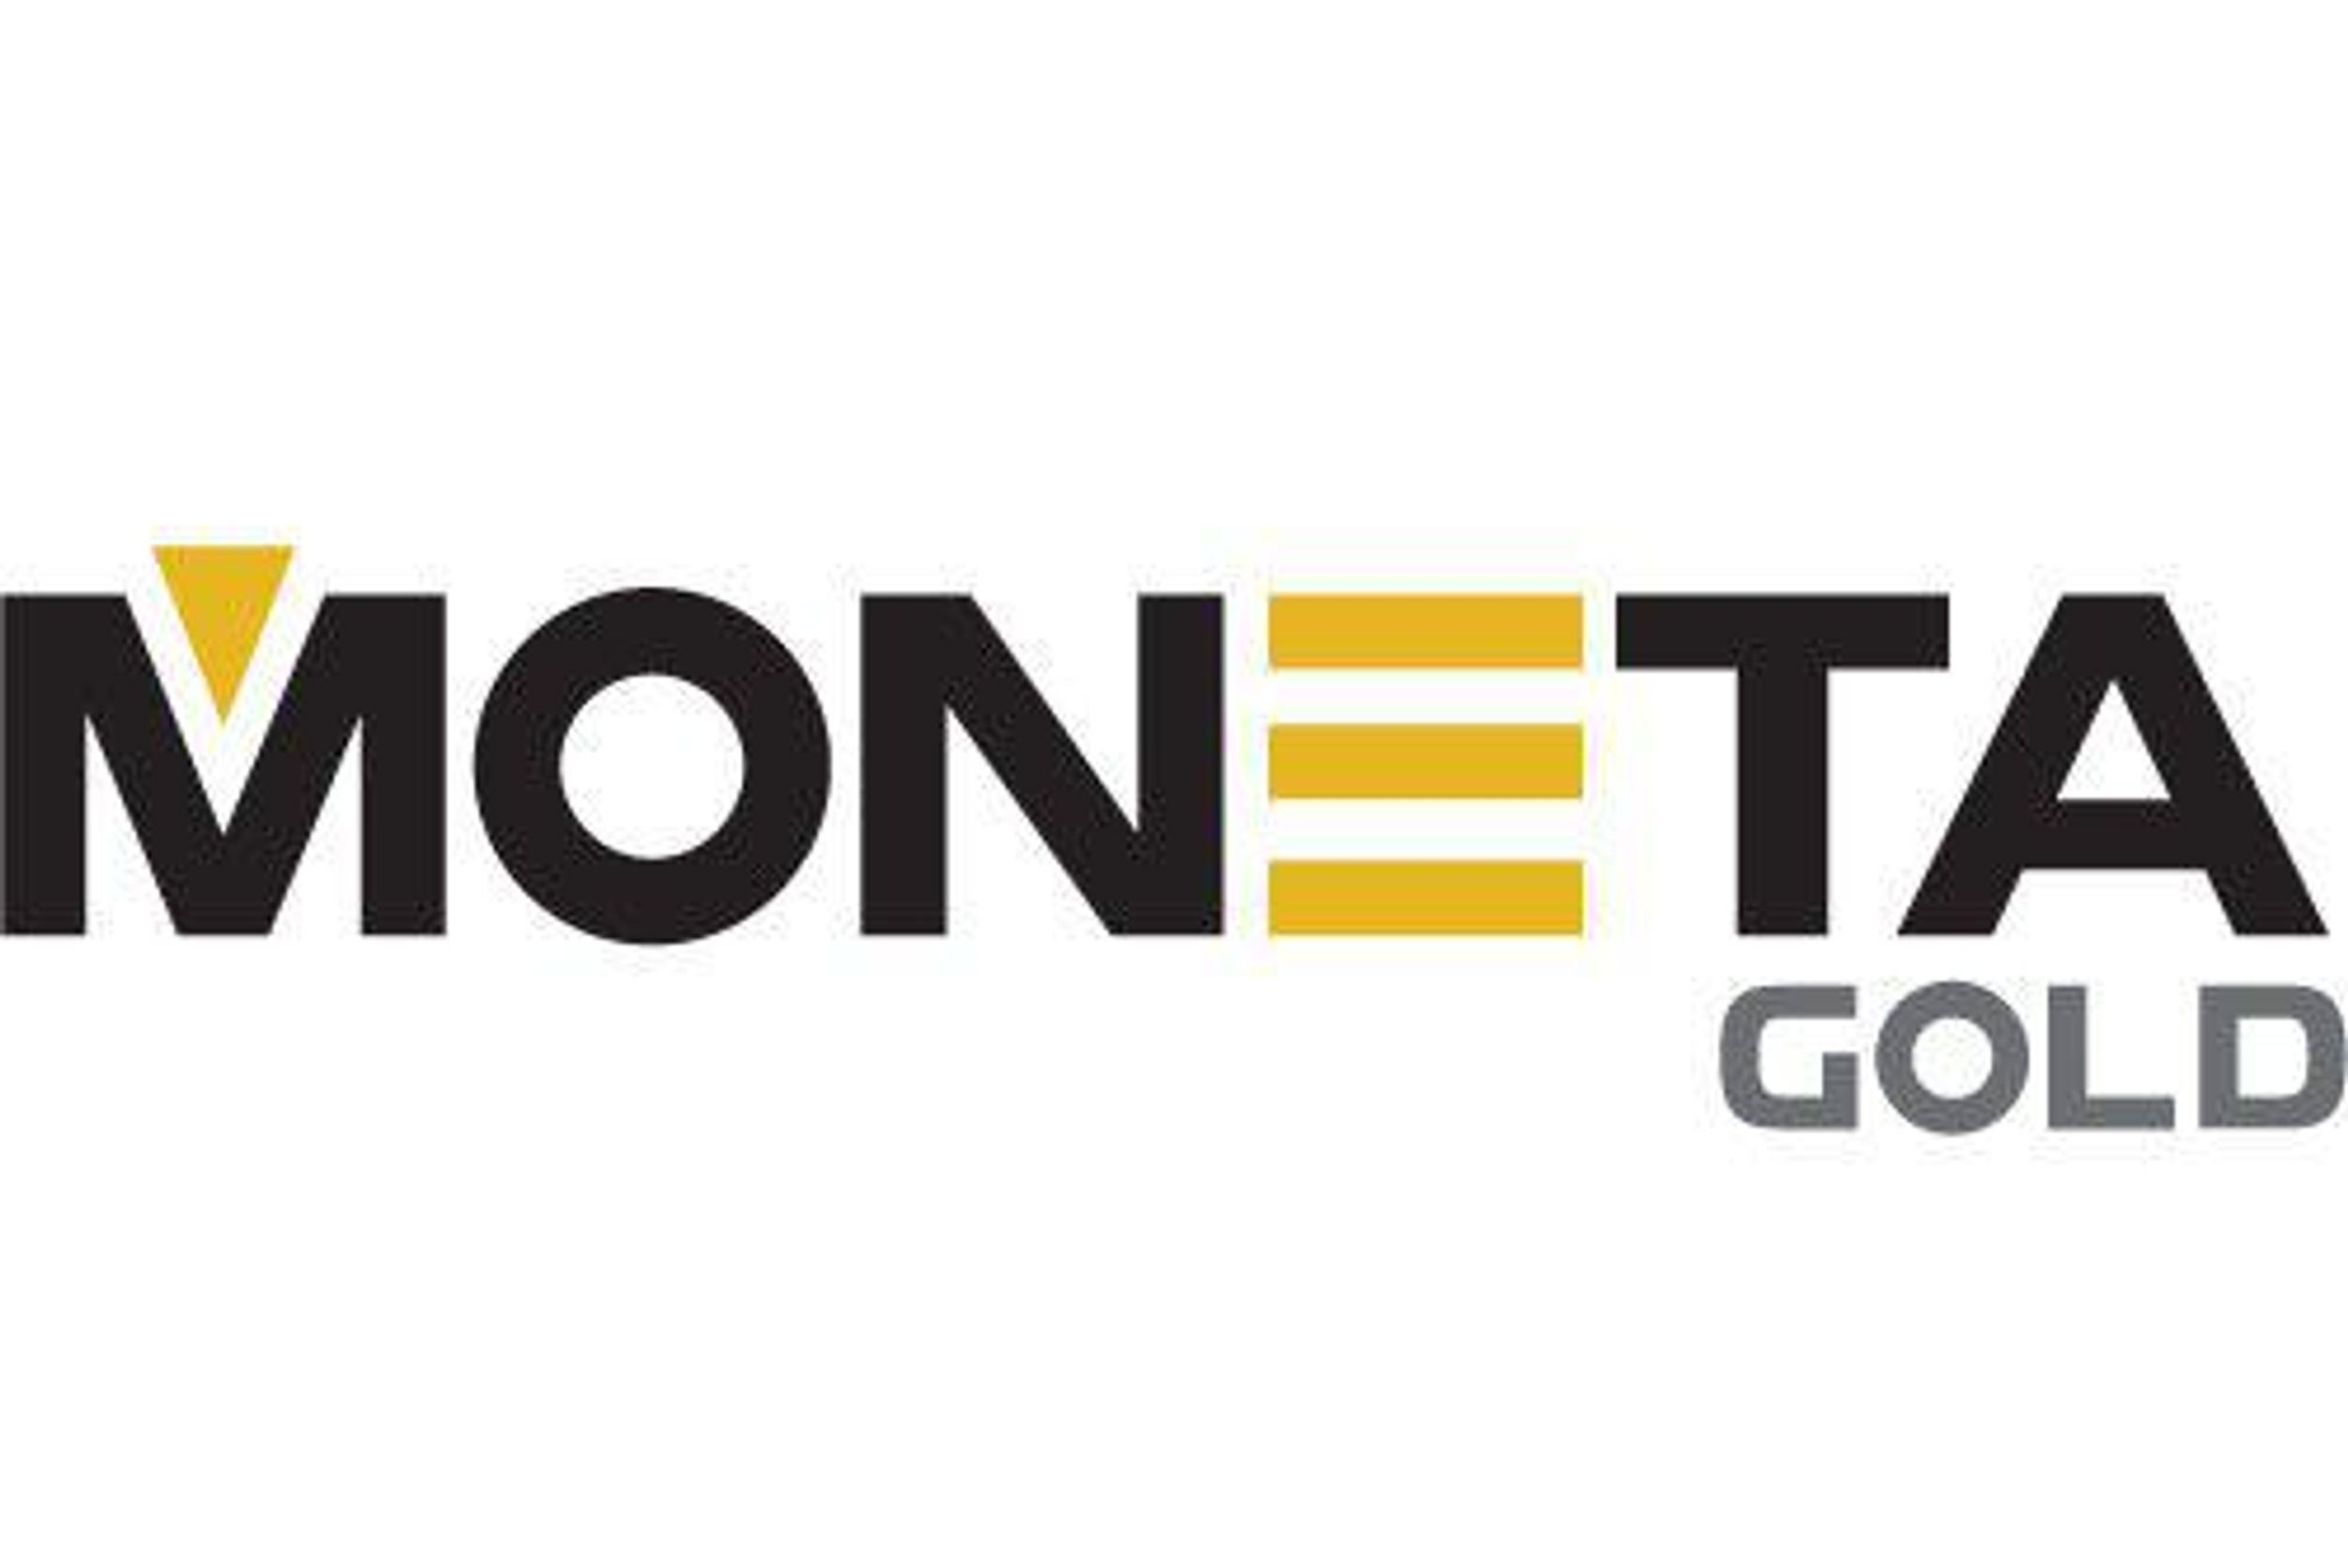 Moneta Increases Resources to 4,265,000 Oz Gold Indicated and 7,496,000 Oz Gold Inferred at Tower Gold Project